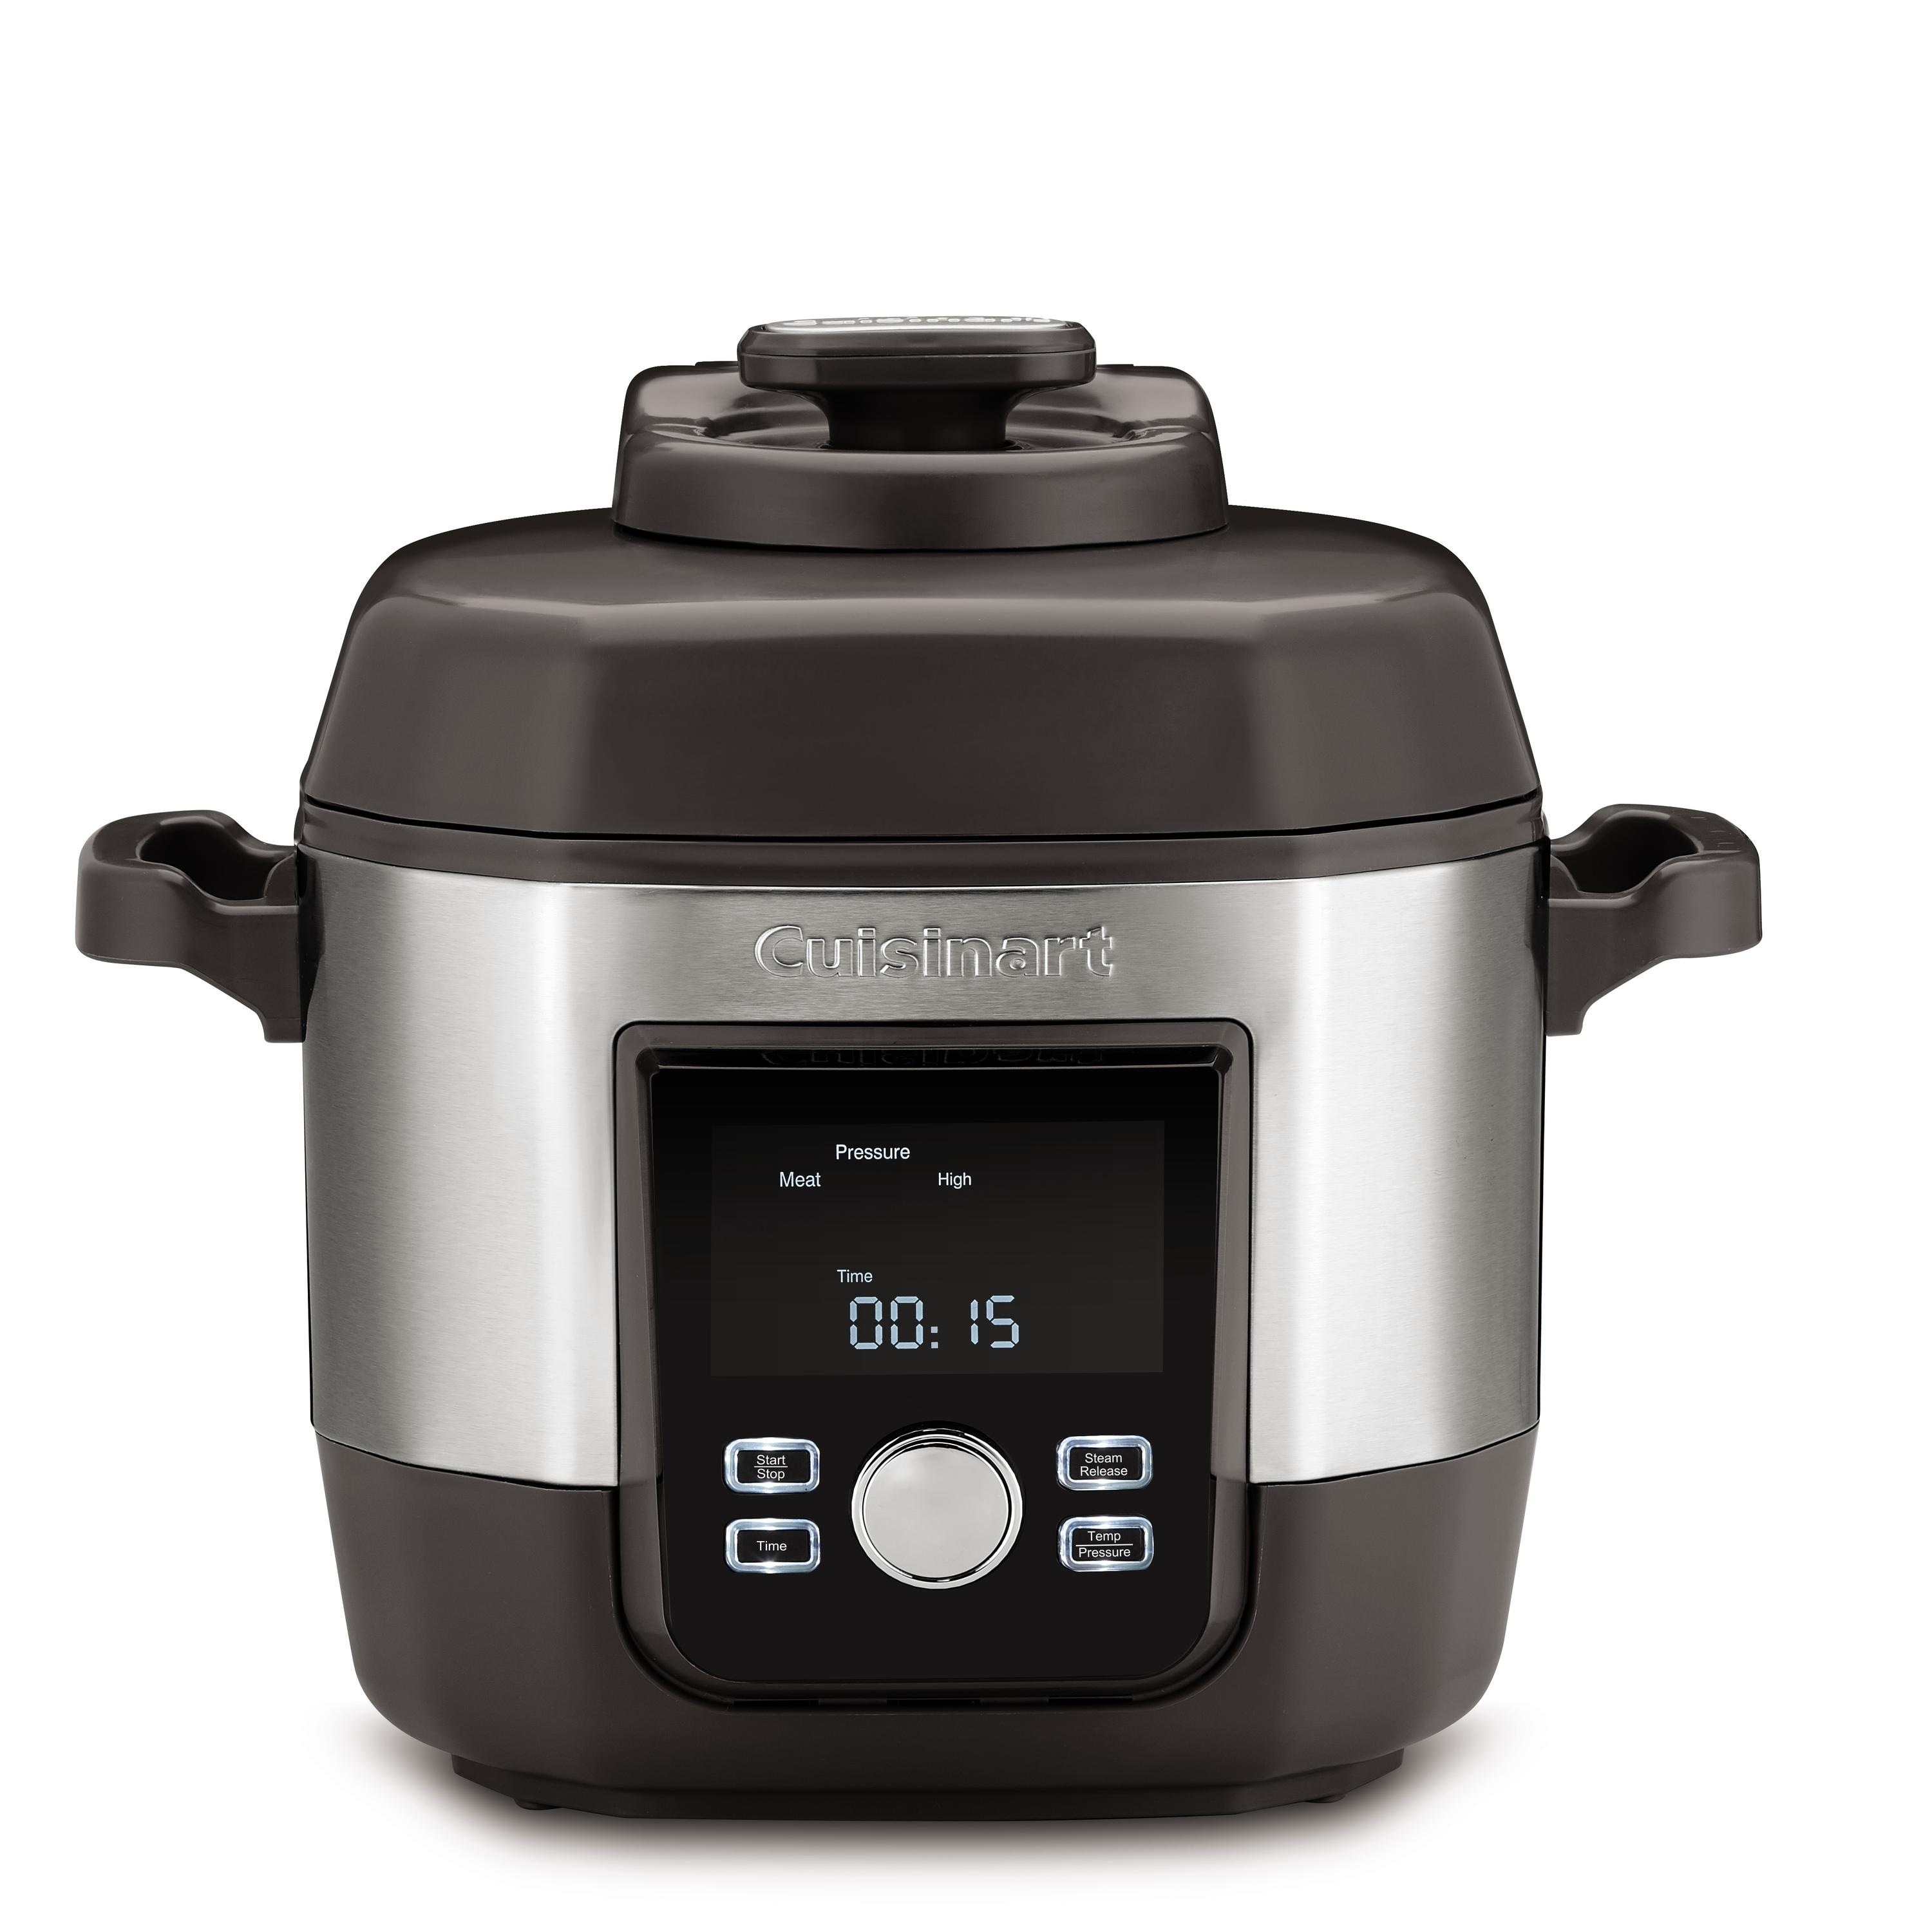 Cuisinart Pressure Cookers - Bed Bath & Beyond